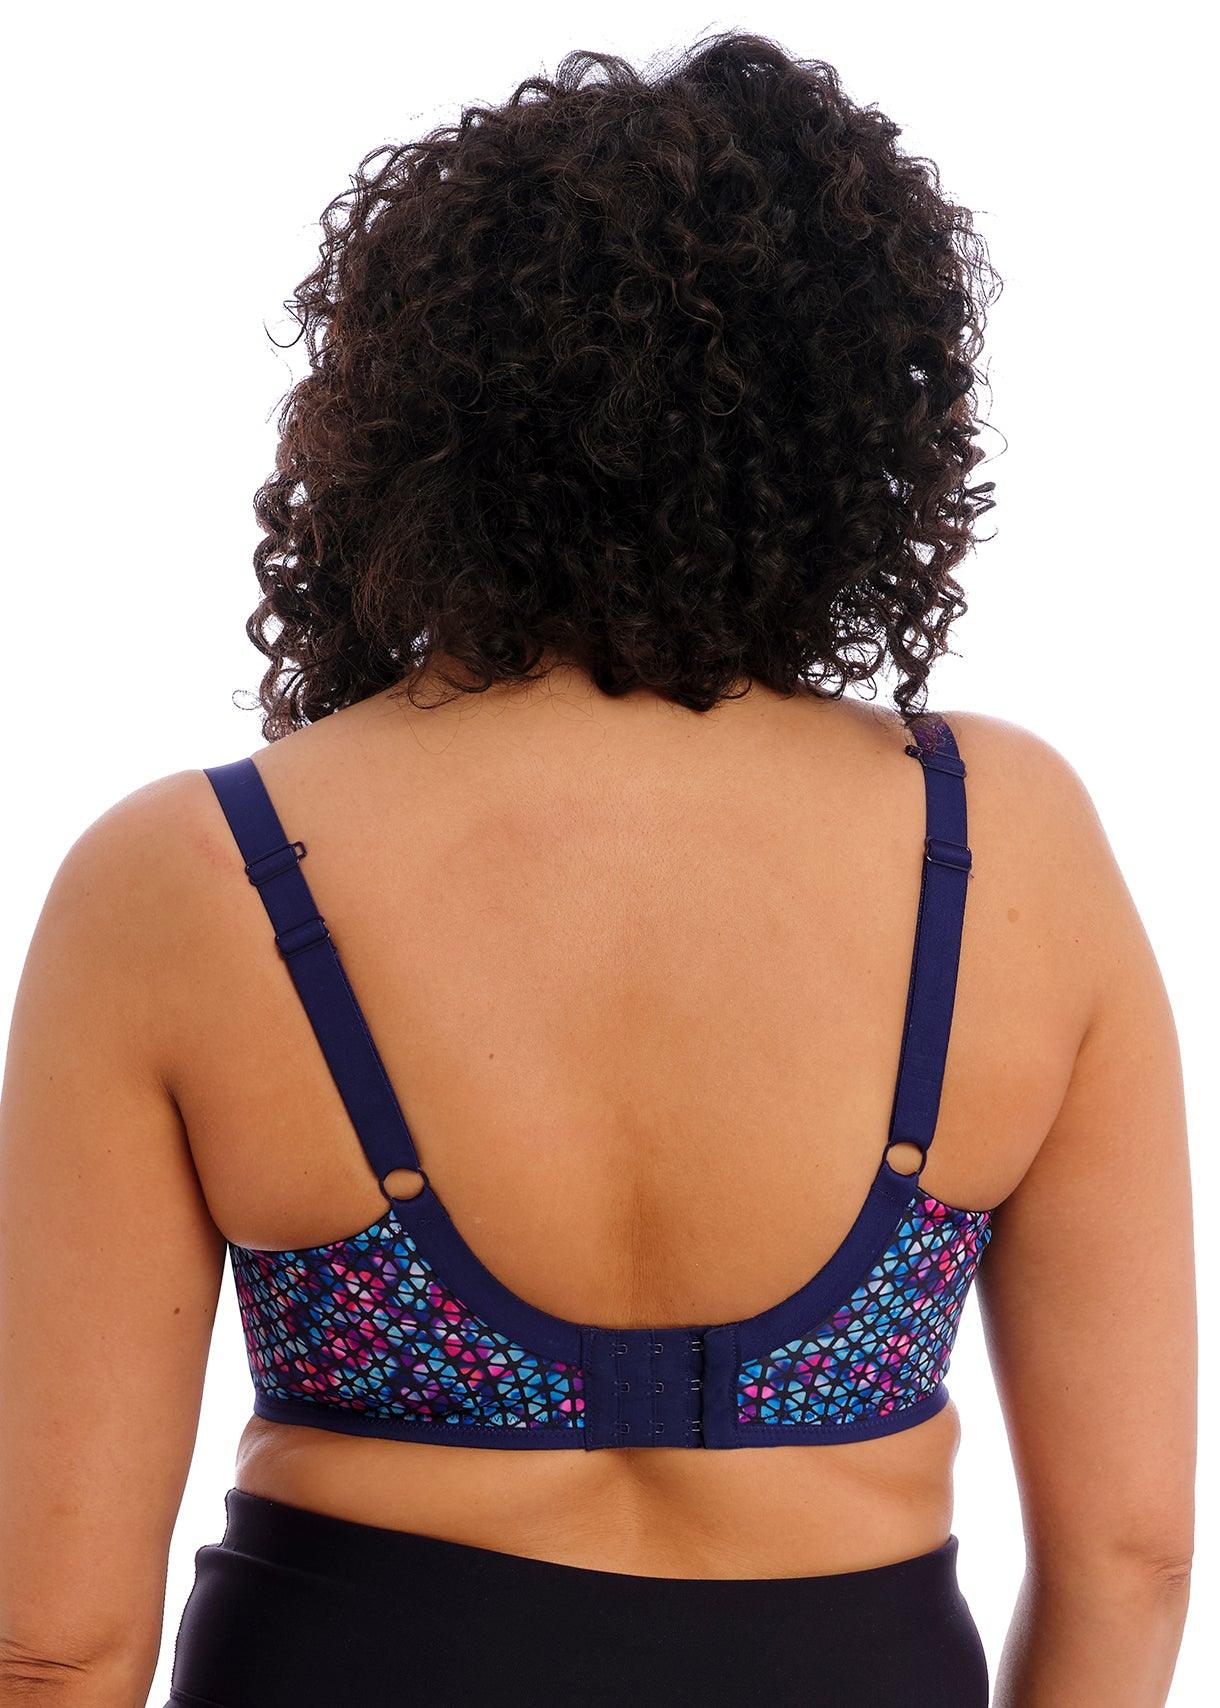 Energise Wired Side Support Sports Bra DD-K, Elomi